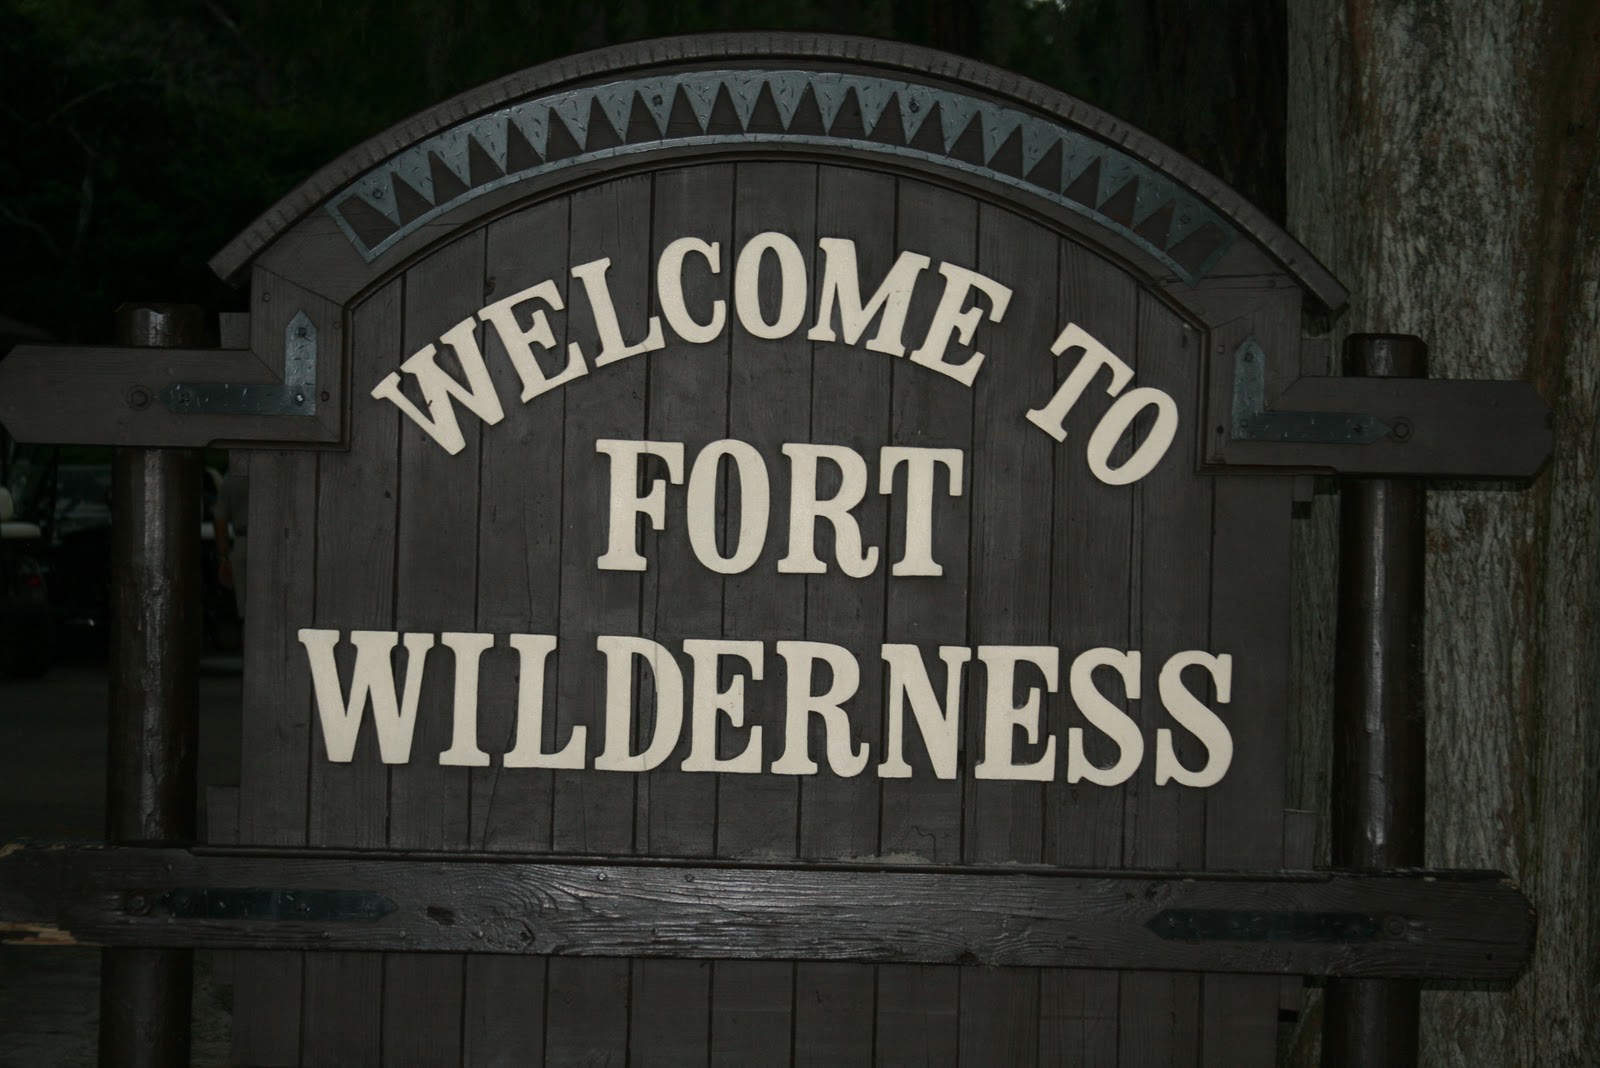 Drunk Disney Guest Causes Extensive Damage at Fort Wilderness